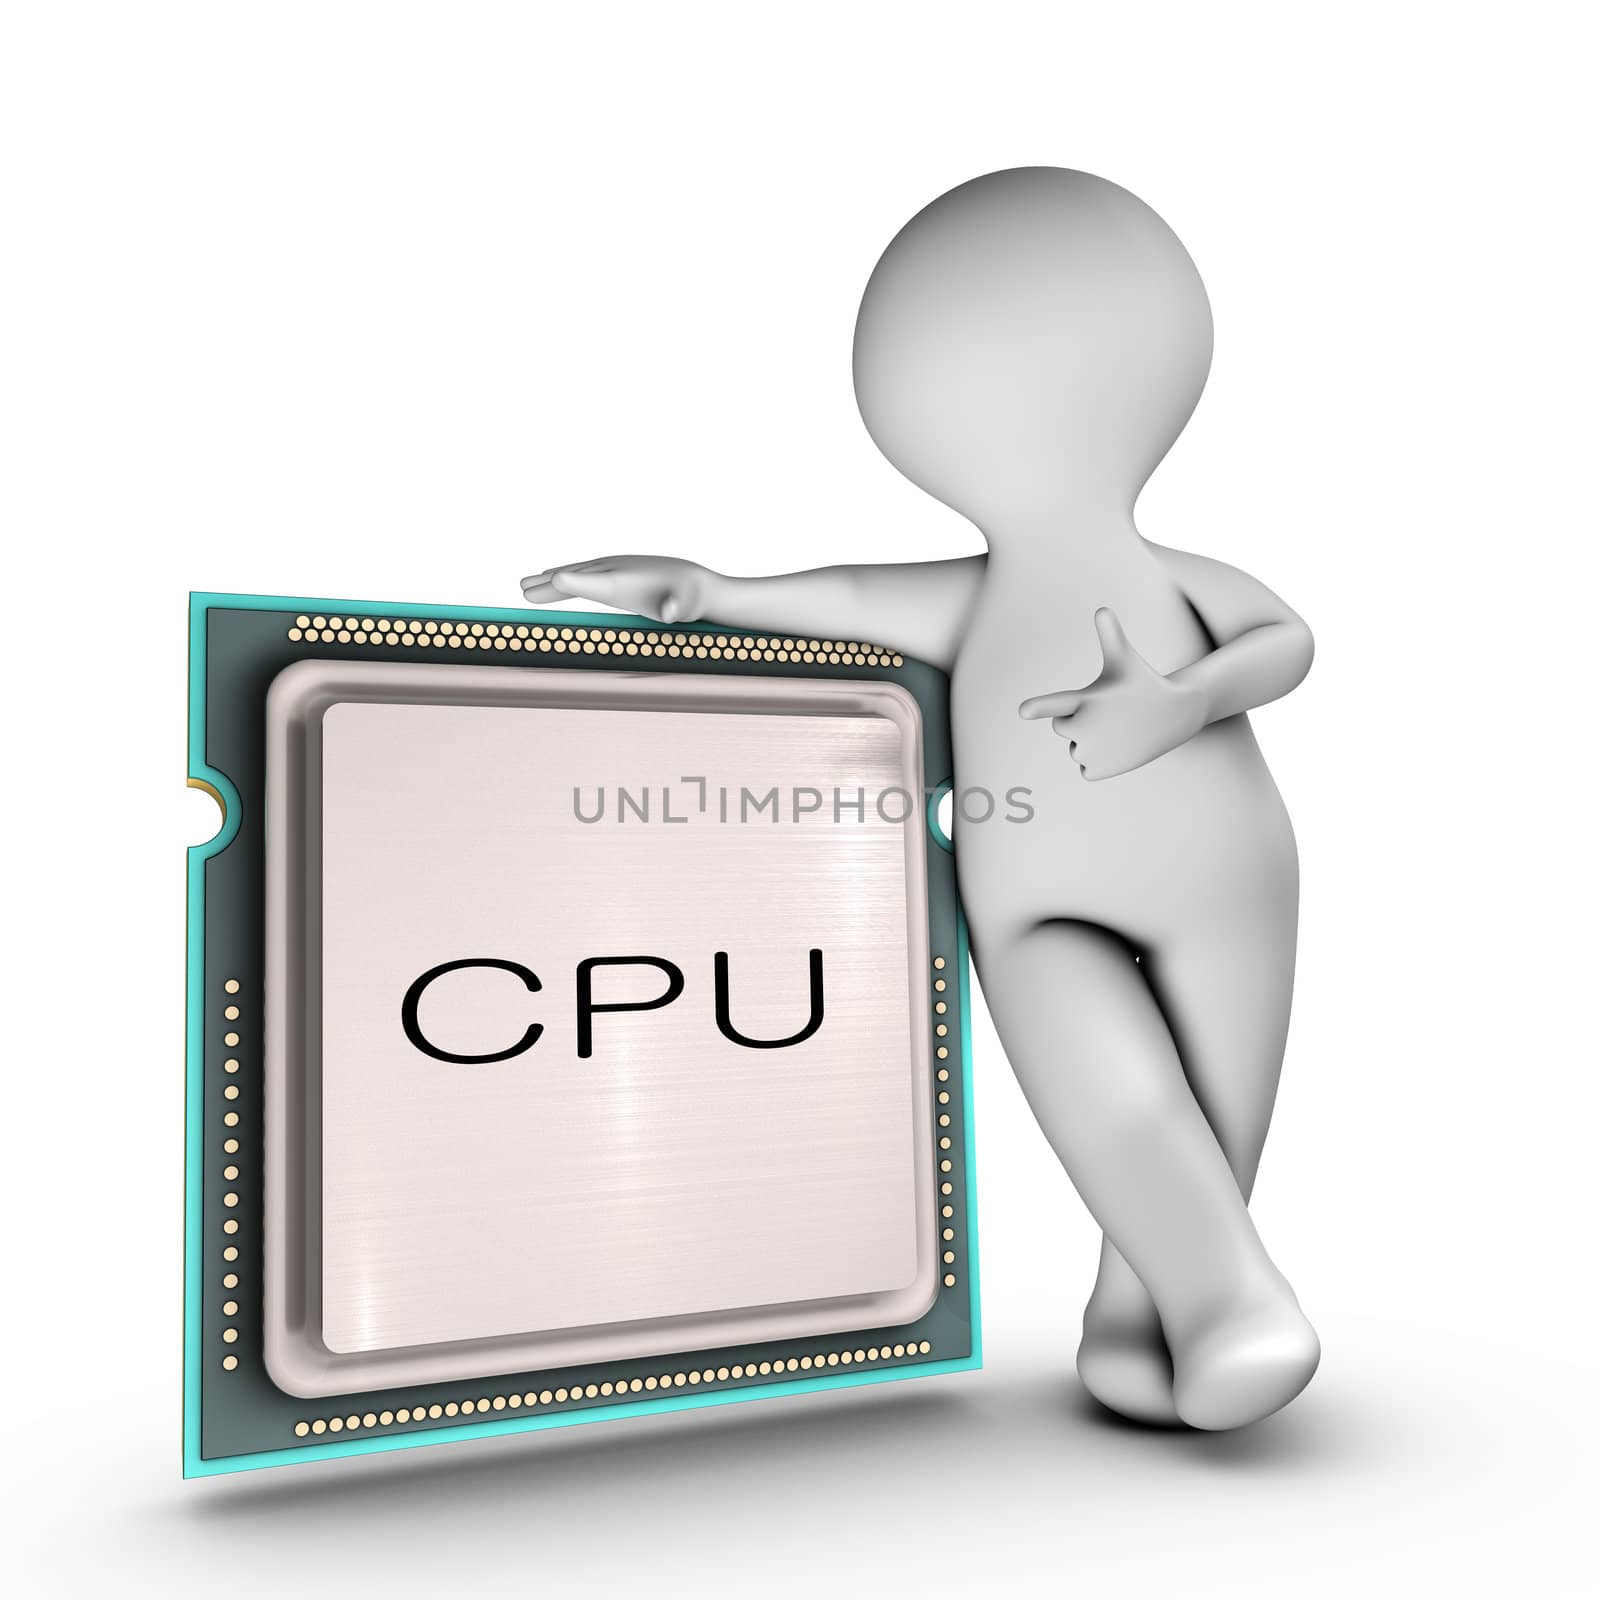 A character relies on a powerful CPU (Central processing unit) by ytjo